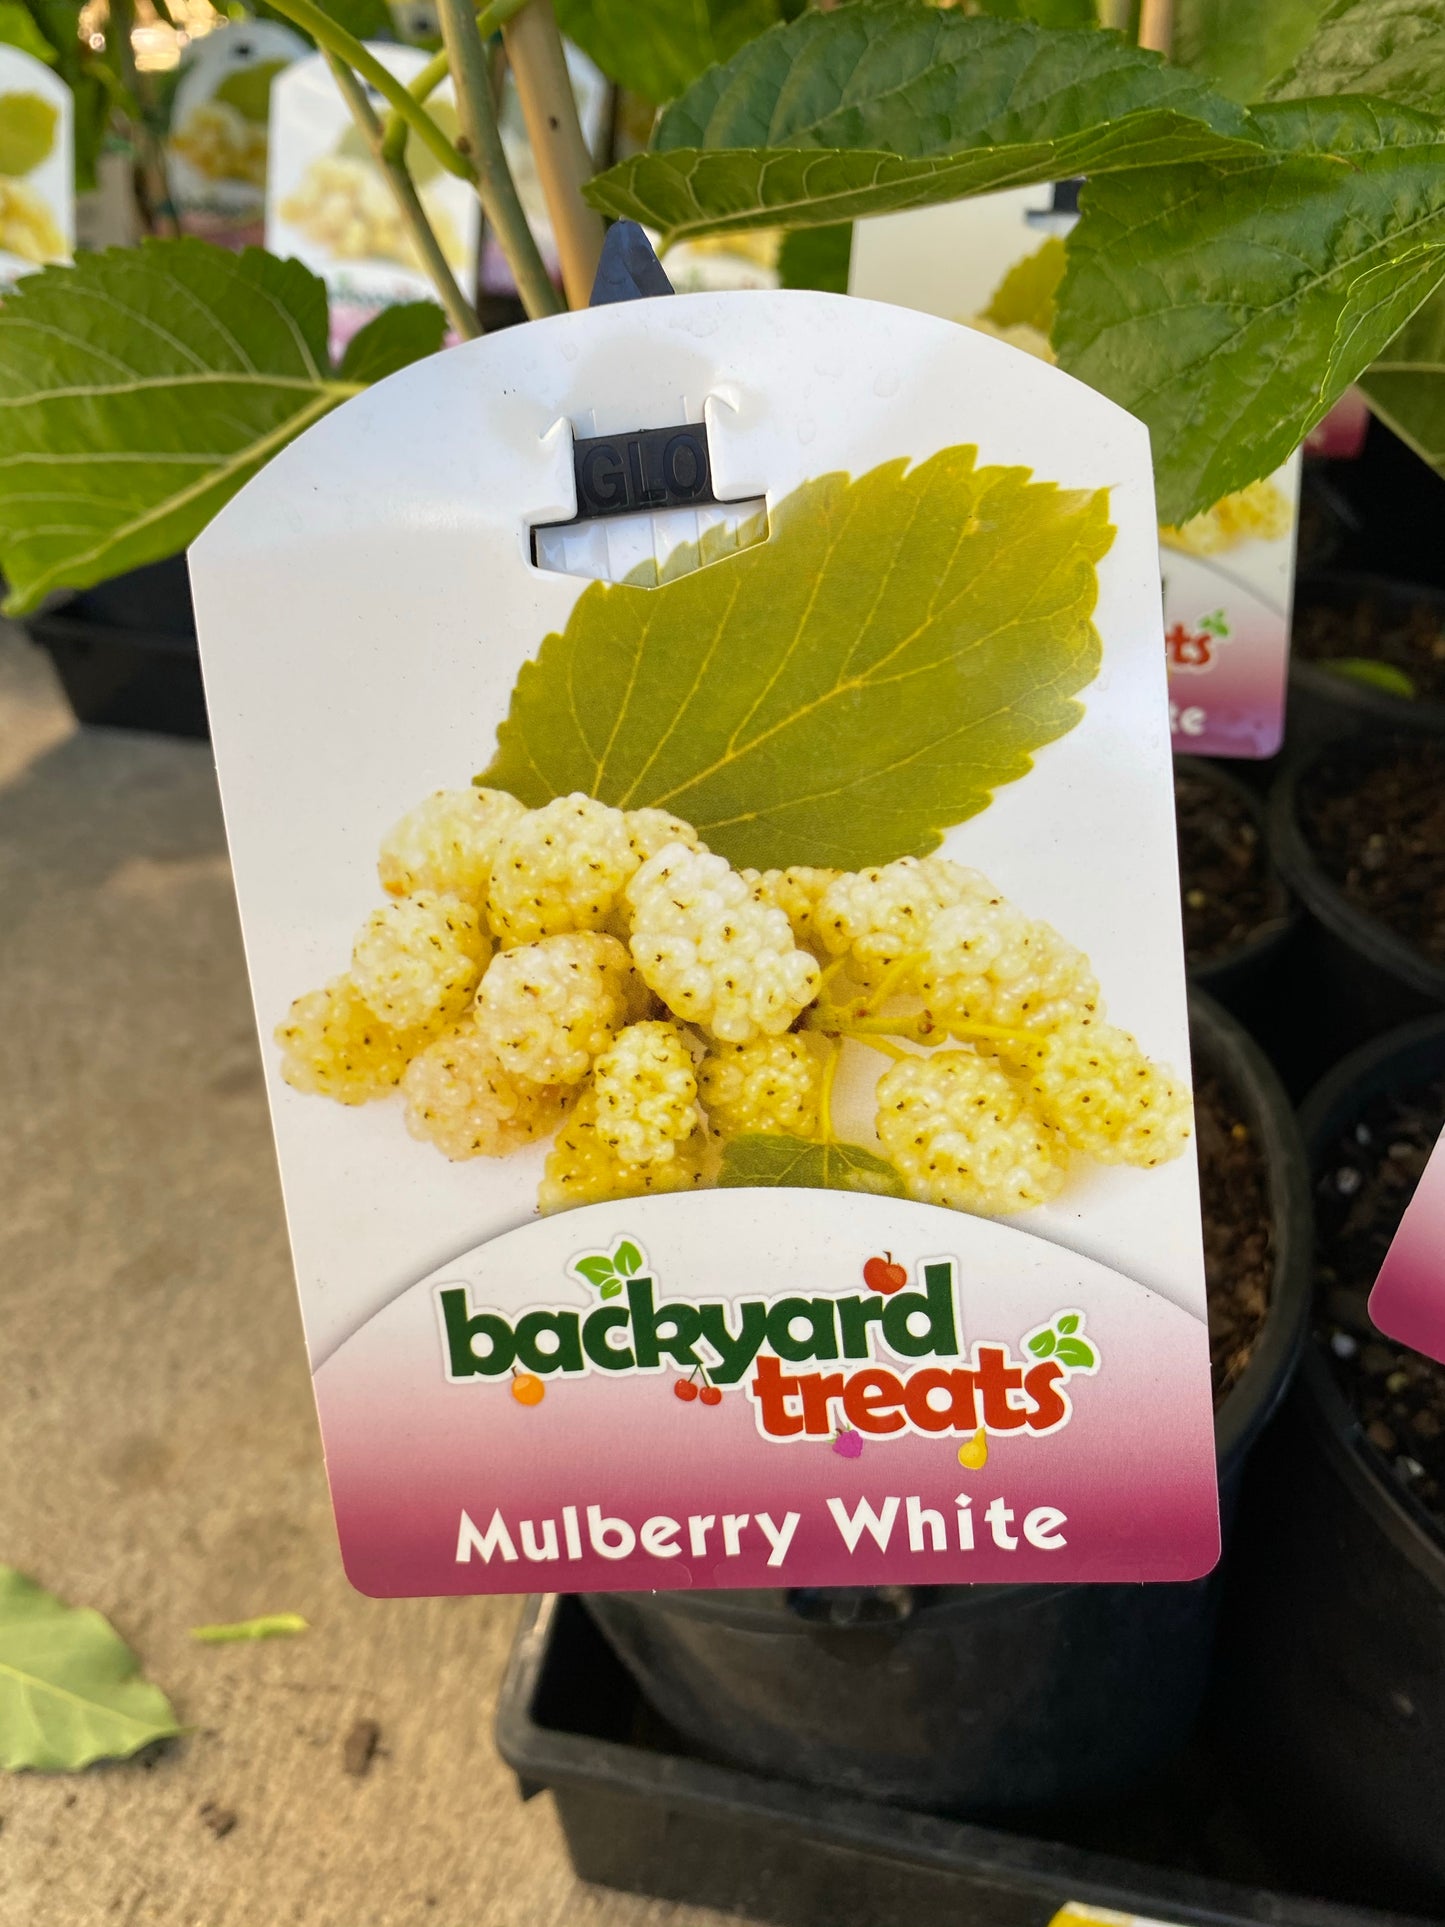 Mulberry - White